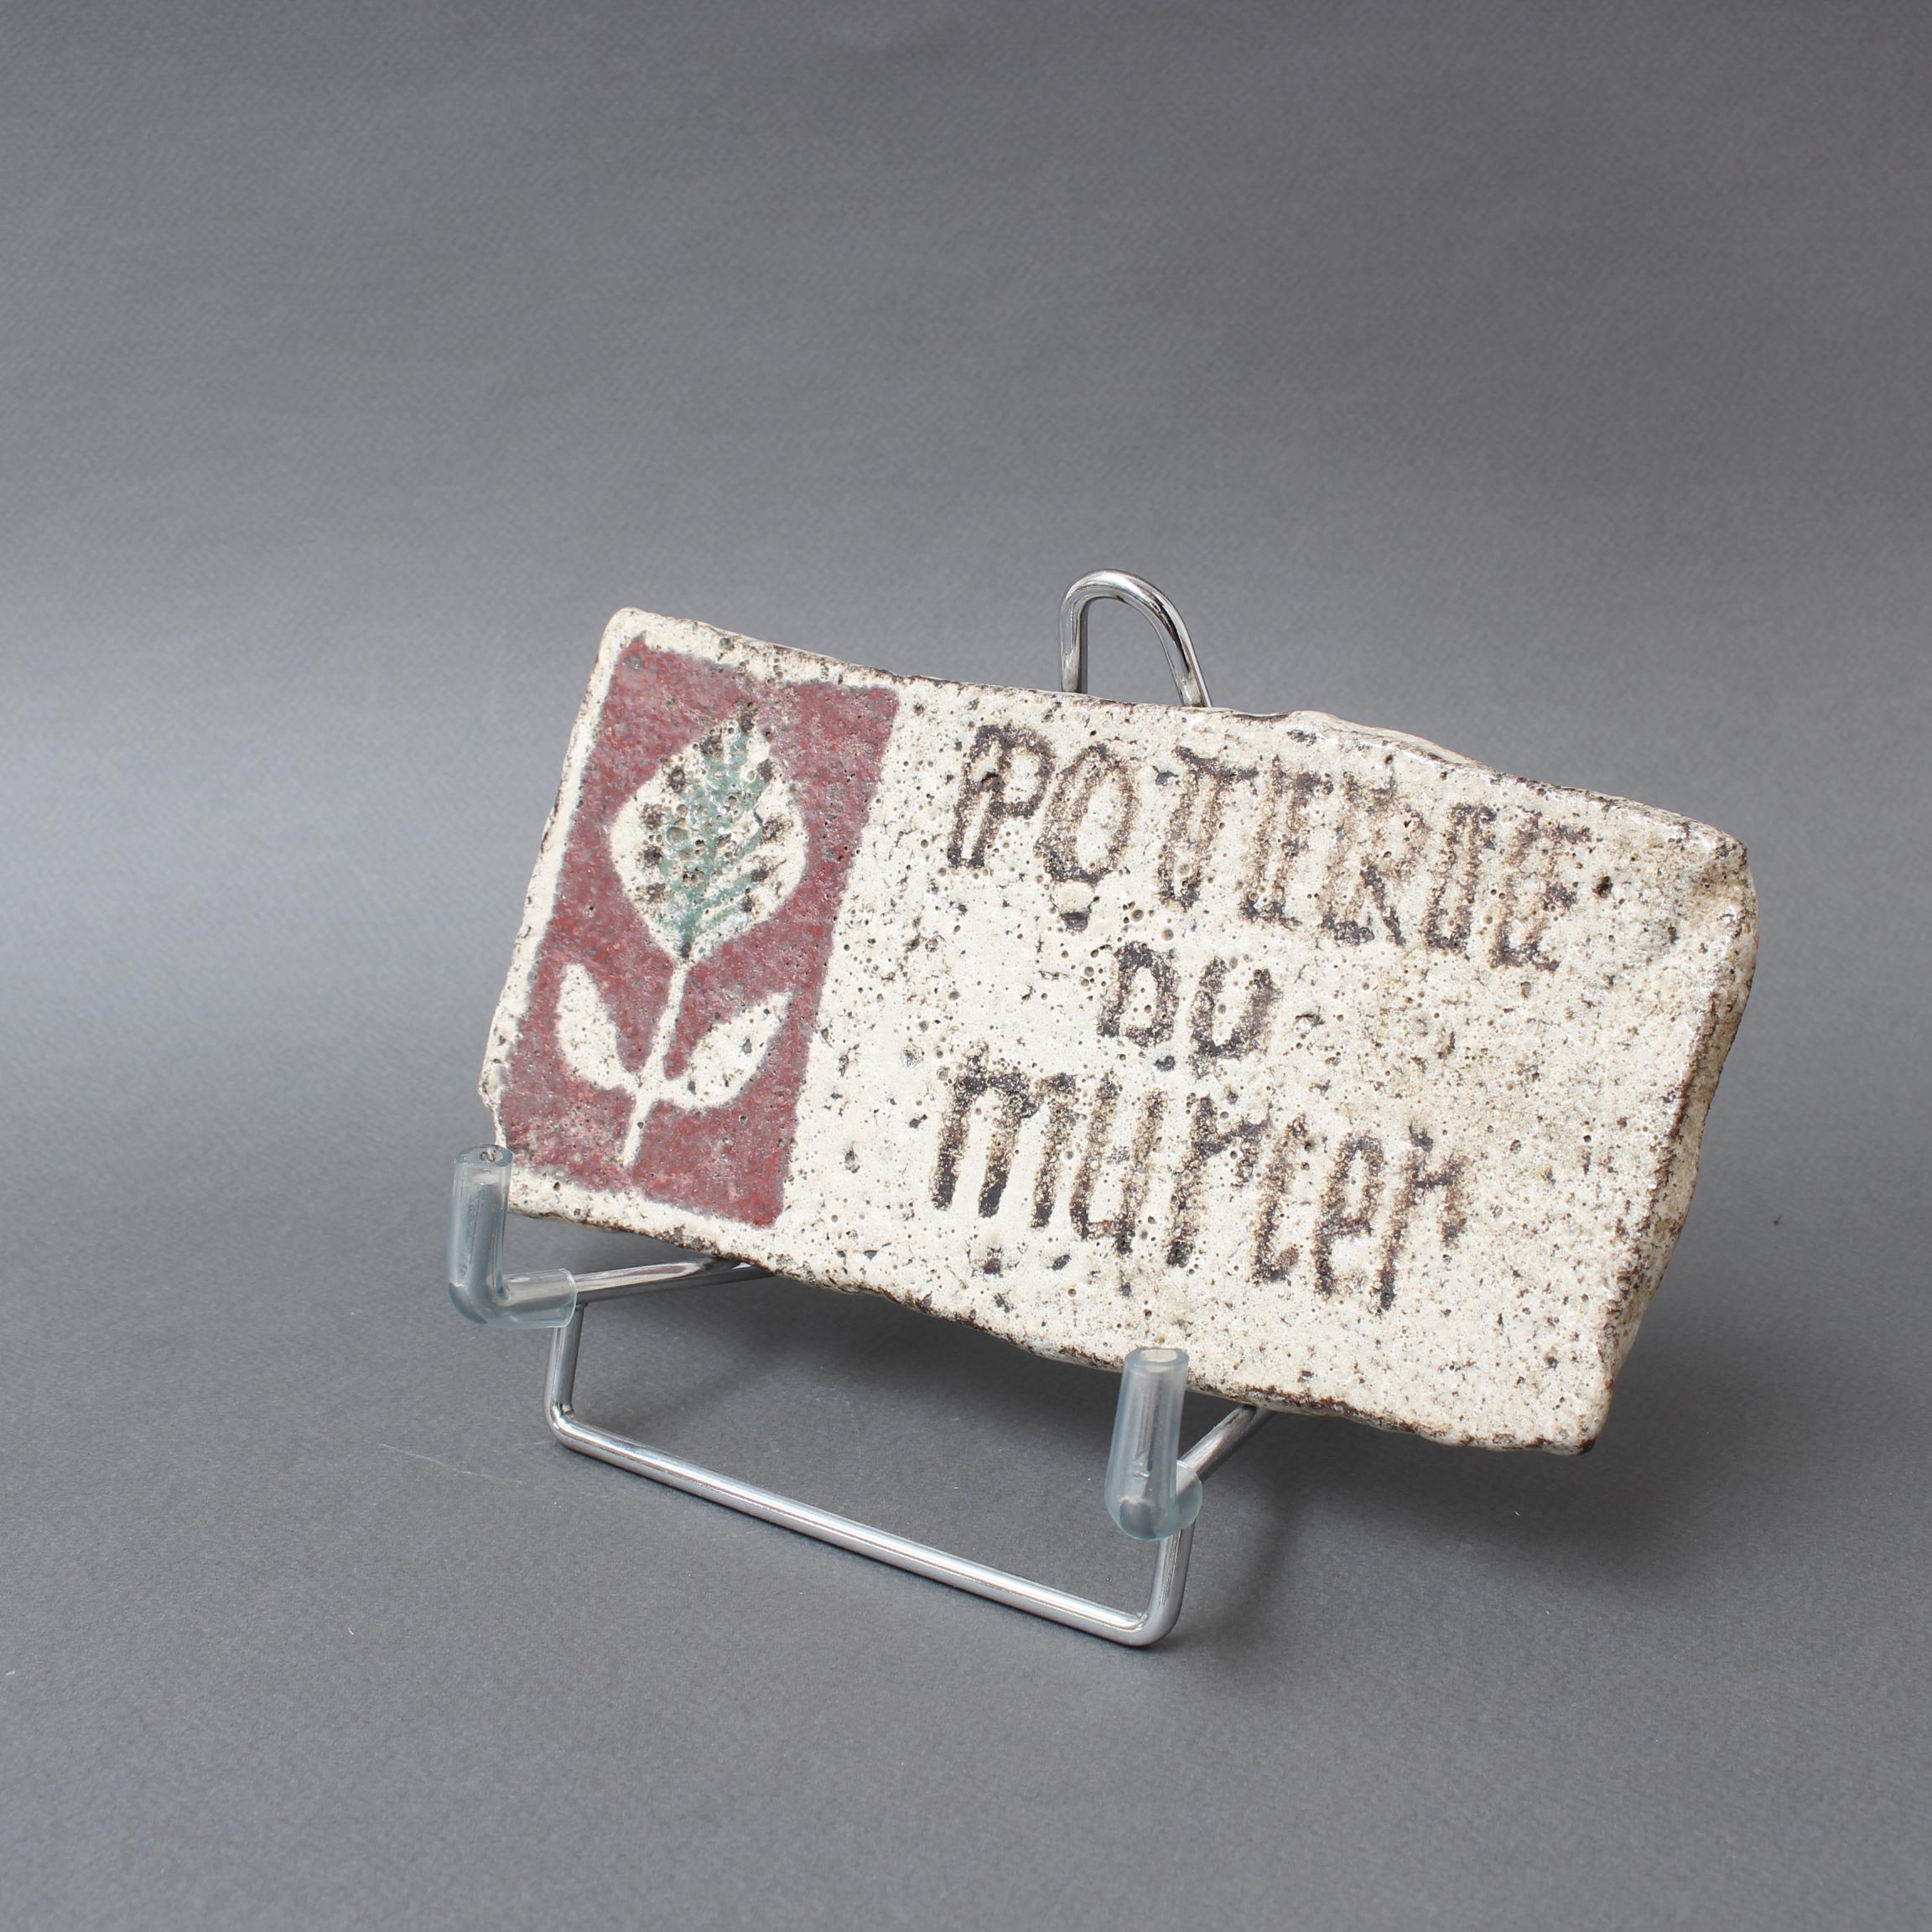 French Ceramic Poterie Du Mûrier Sign with Mulberry Leaf Logo (circa 1950s) by Gustave Reynaud. Reynaud started his pottery in the famous town of Vallauris in the South of France. This is a charming original door plaque for his pottery sporting its